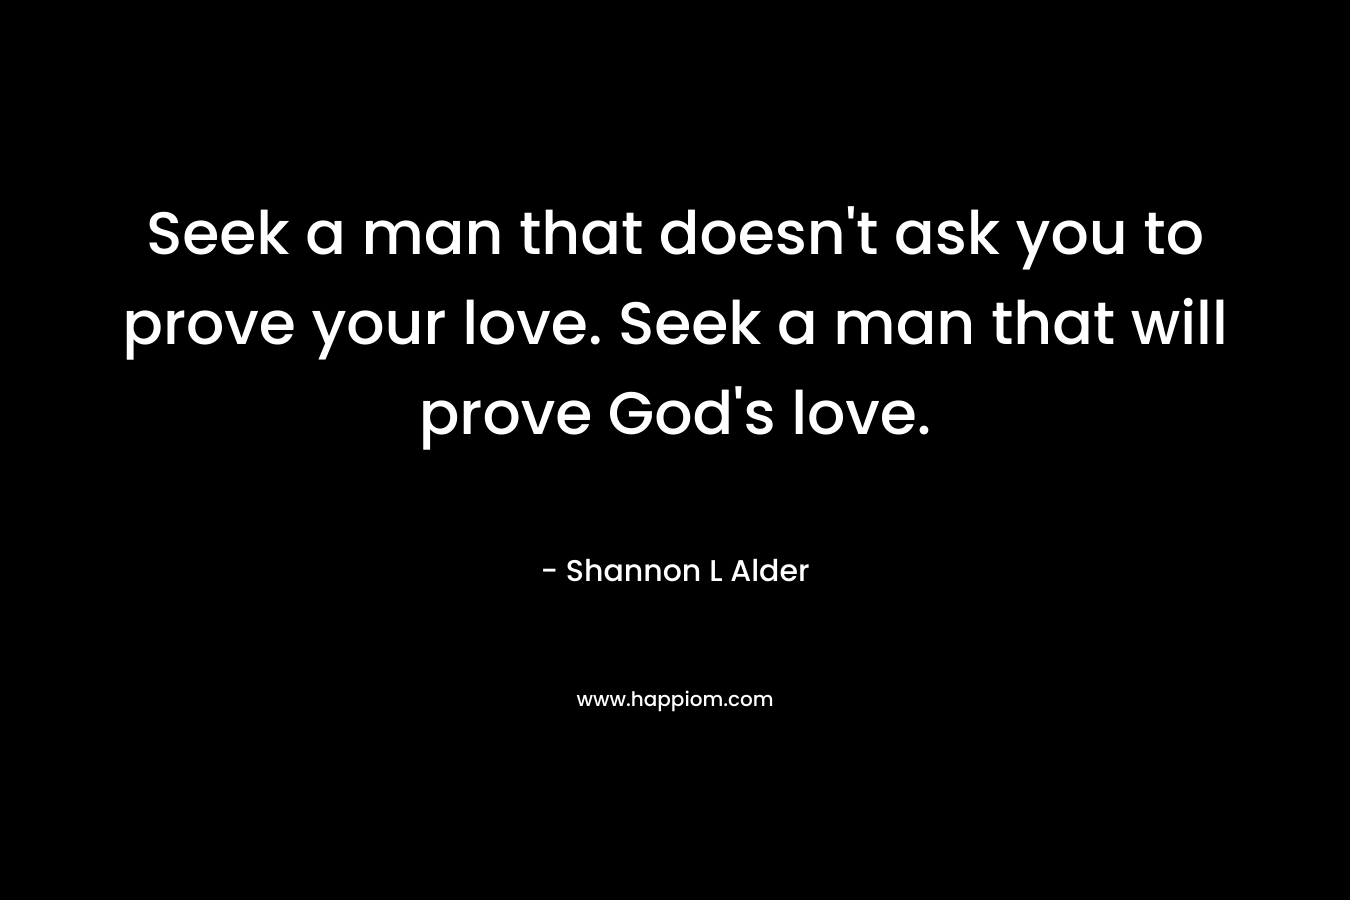 Seek a man that doesn't ask you to prove your love. Seek a man that will prove God's love.